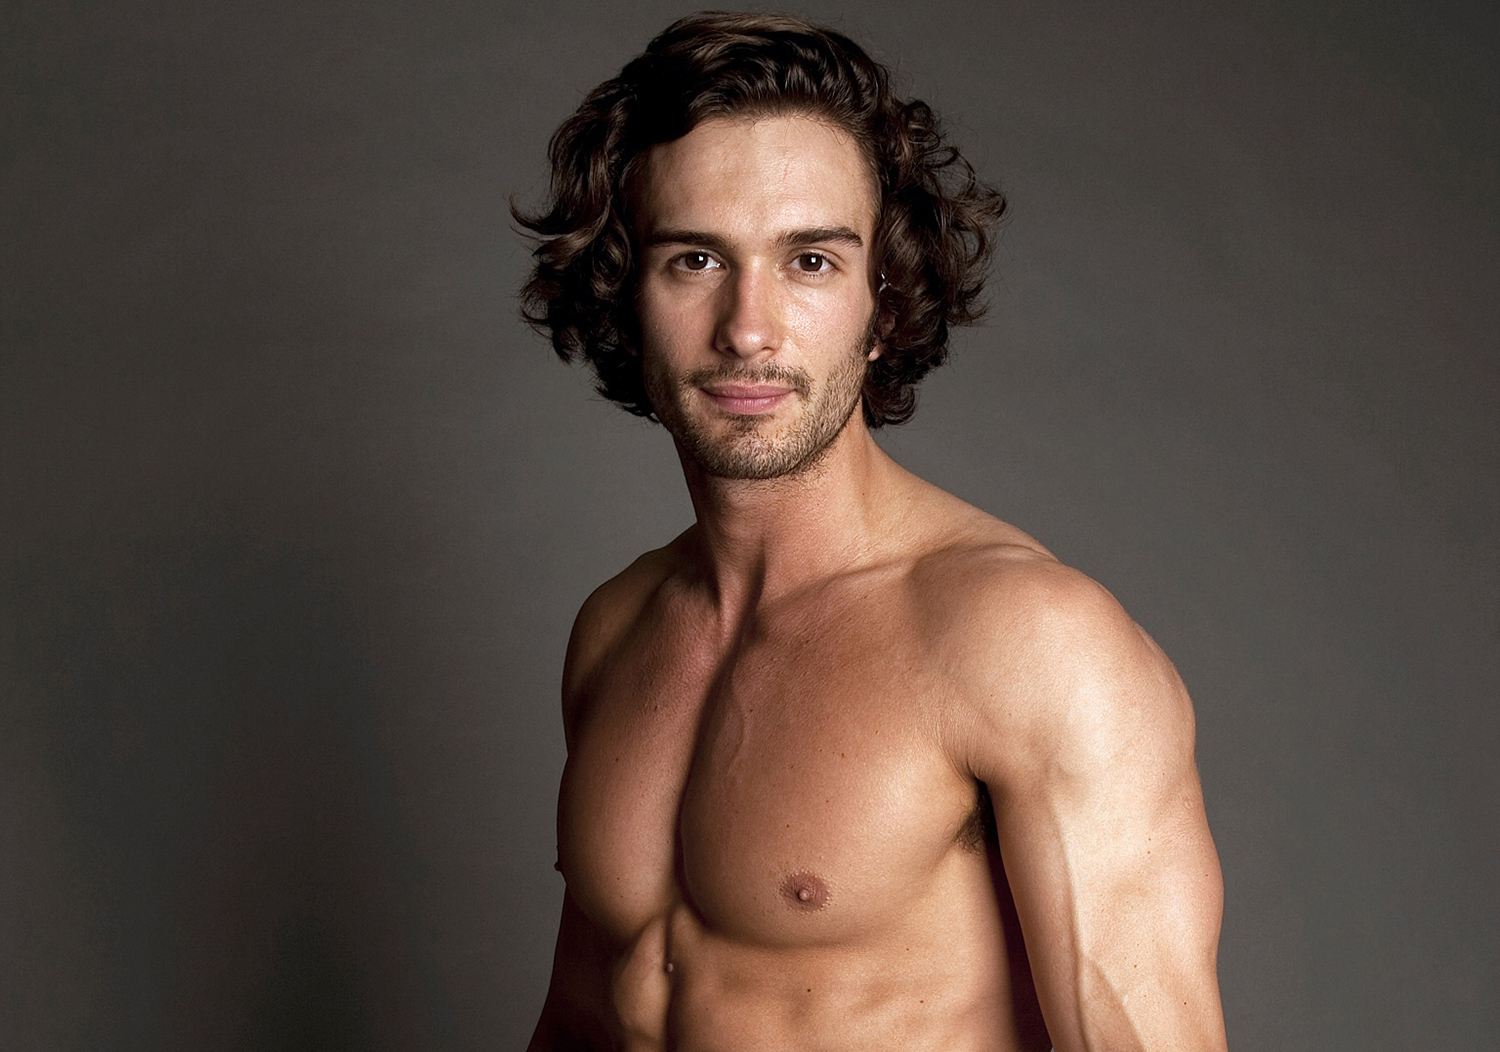 The beacon of all things fitness, Joe Wicks, has fallen off the lean wagon.  Well, he's only human